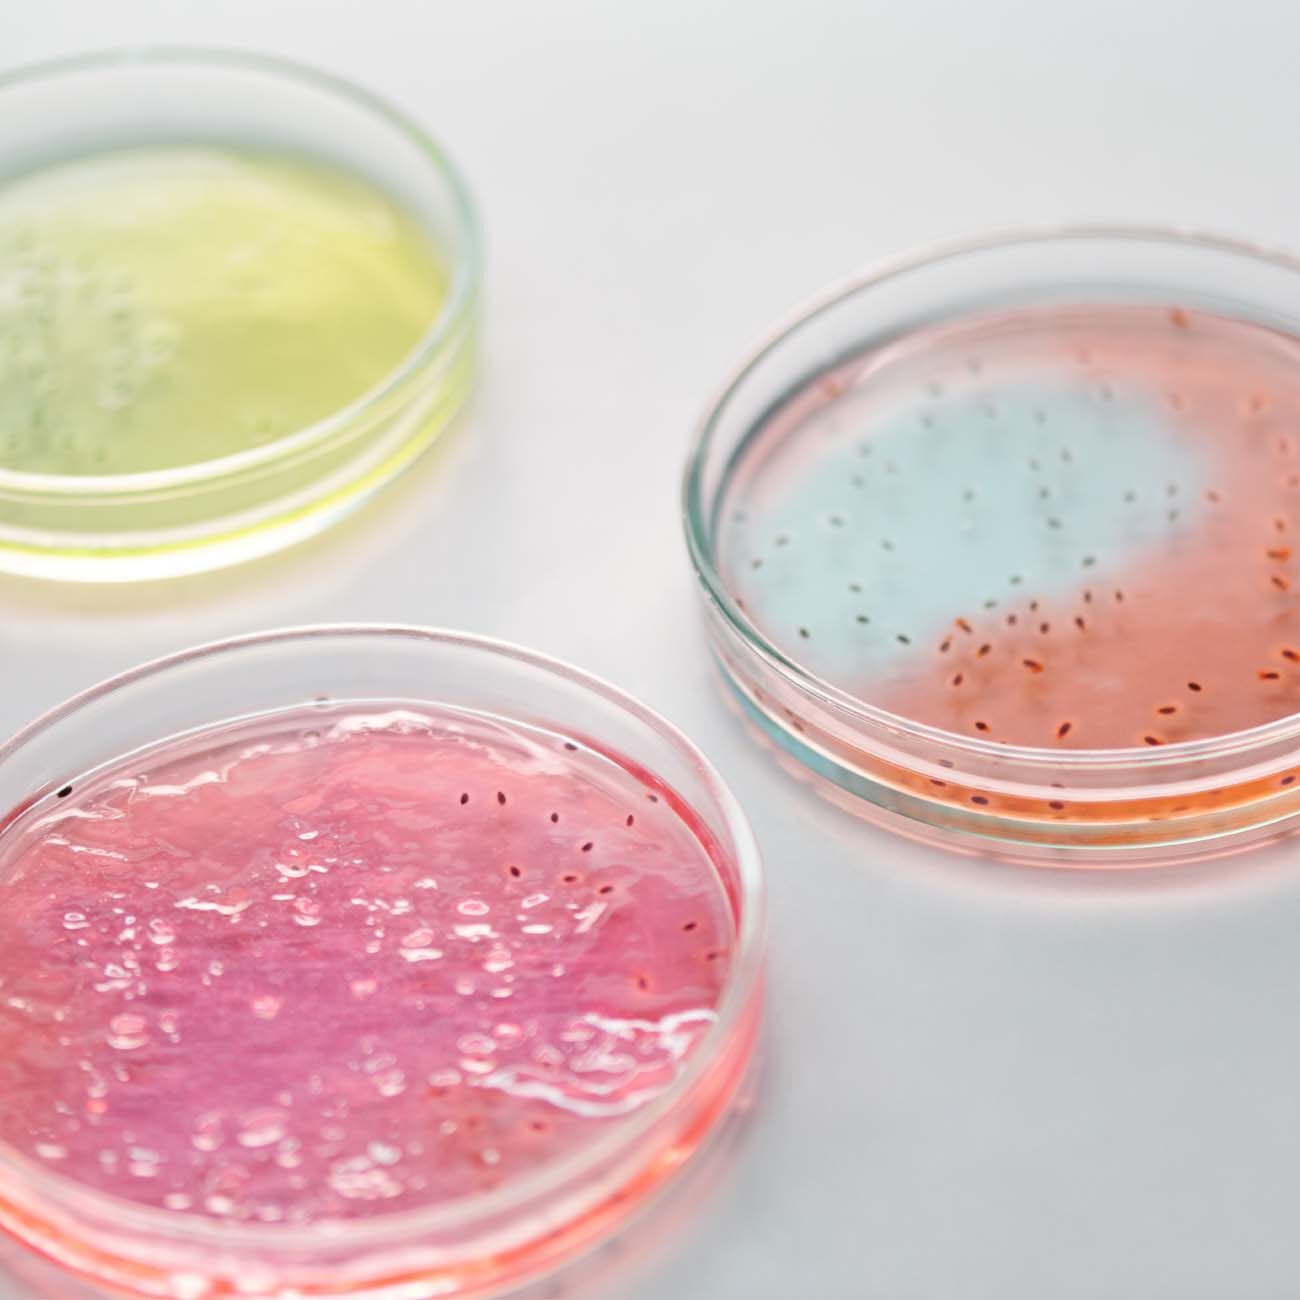 A collection of petrie dishes with a variety of bacteria growth in pinks and yellows